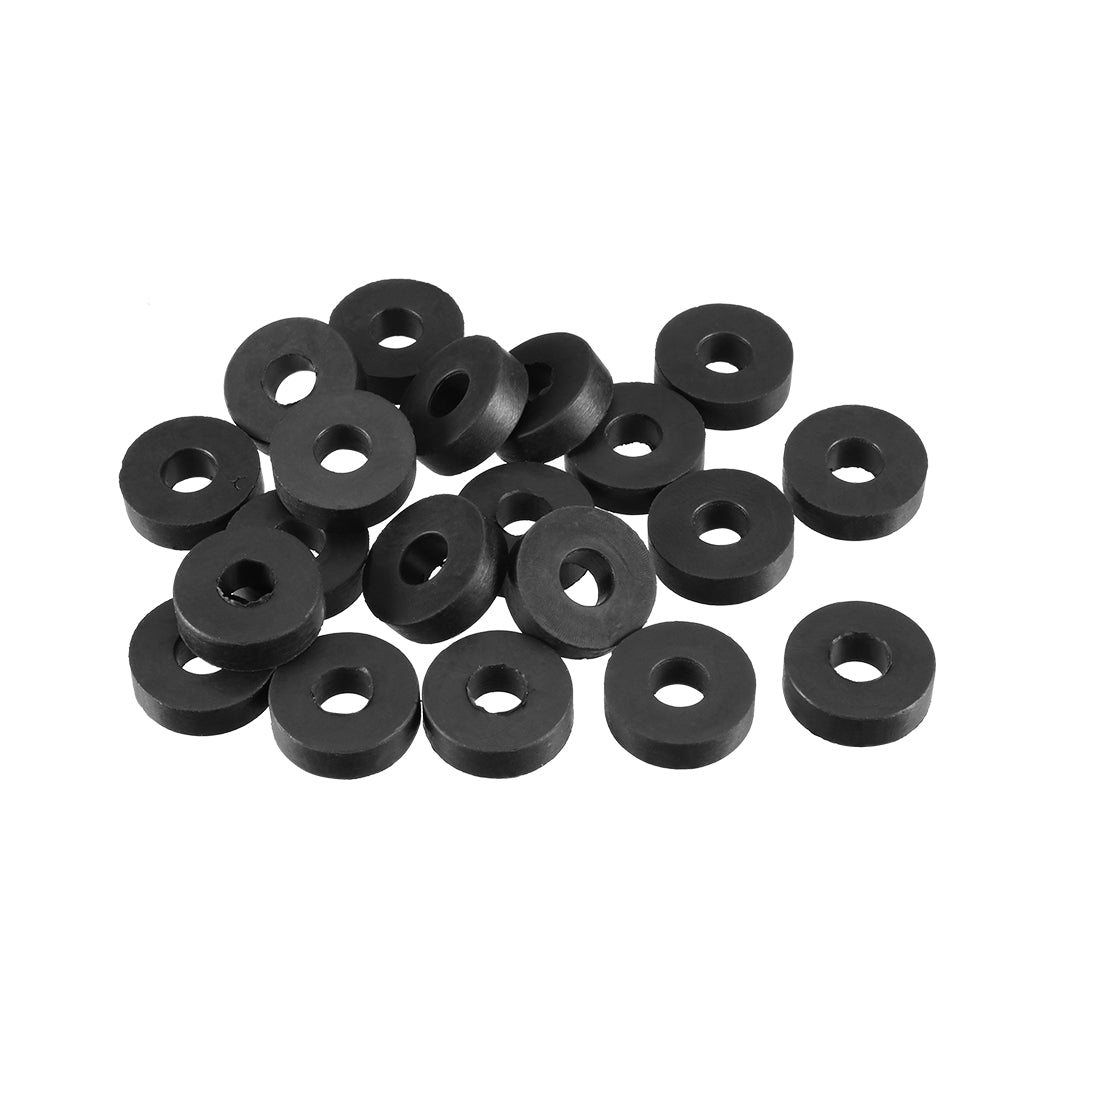 uxcell Uxcell Rubber Round Flat Washer Assortment Size Flat Washers, Black Pack of 20